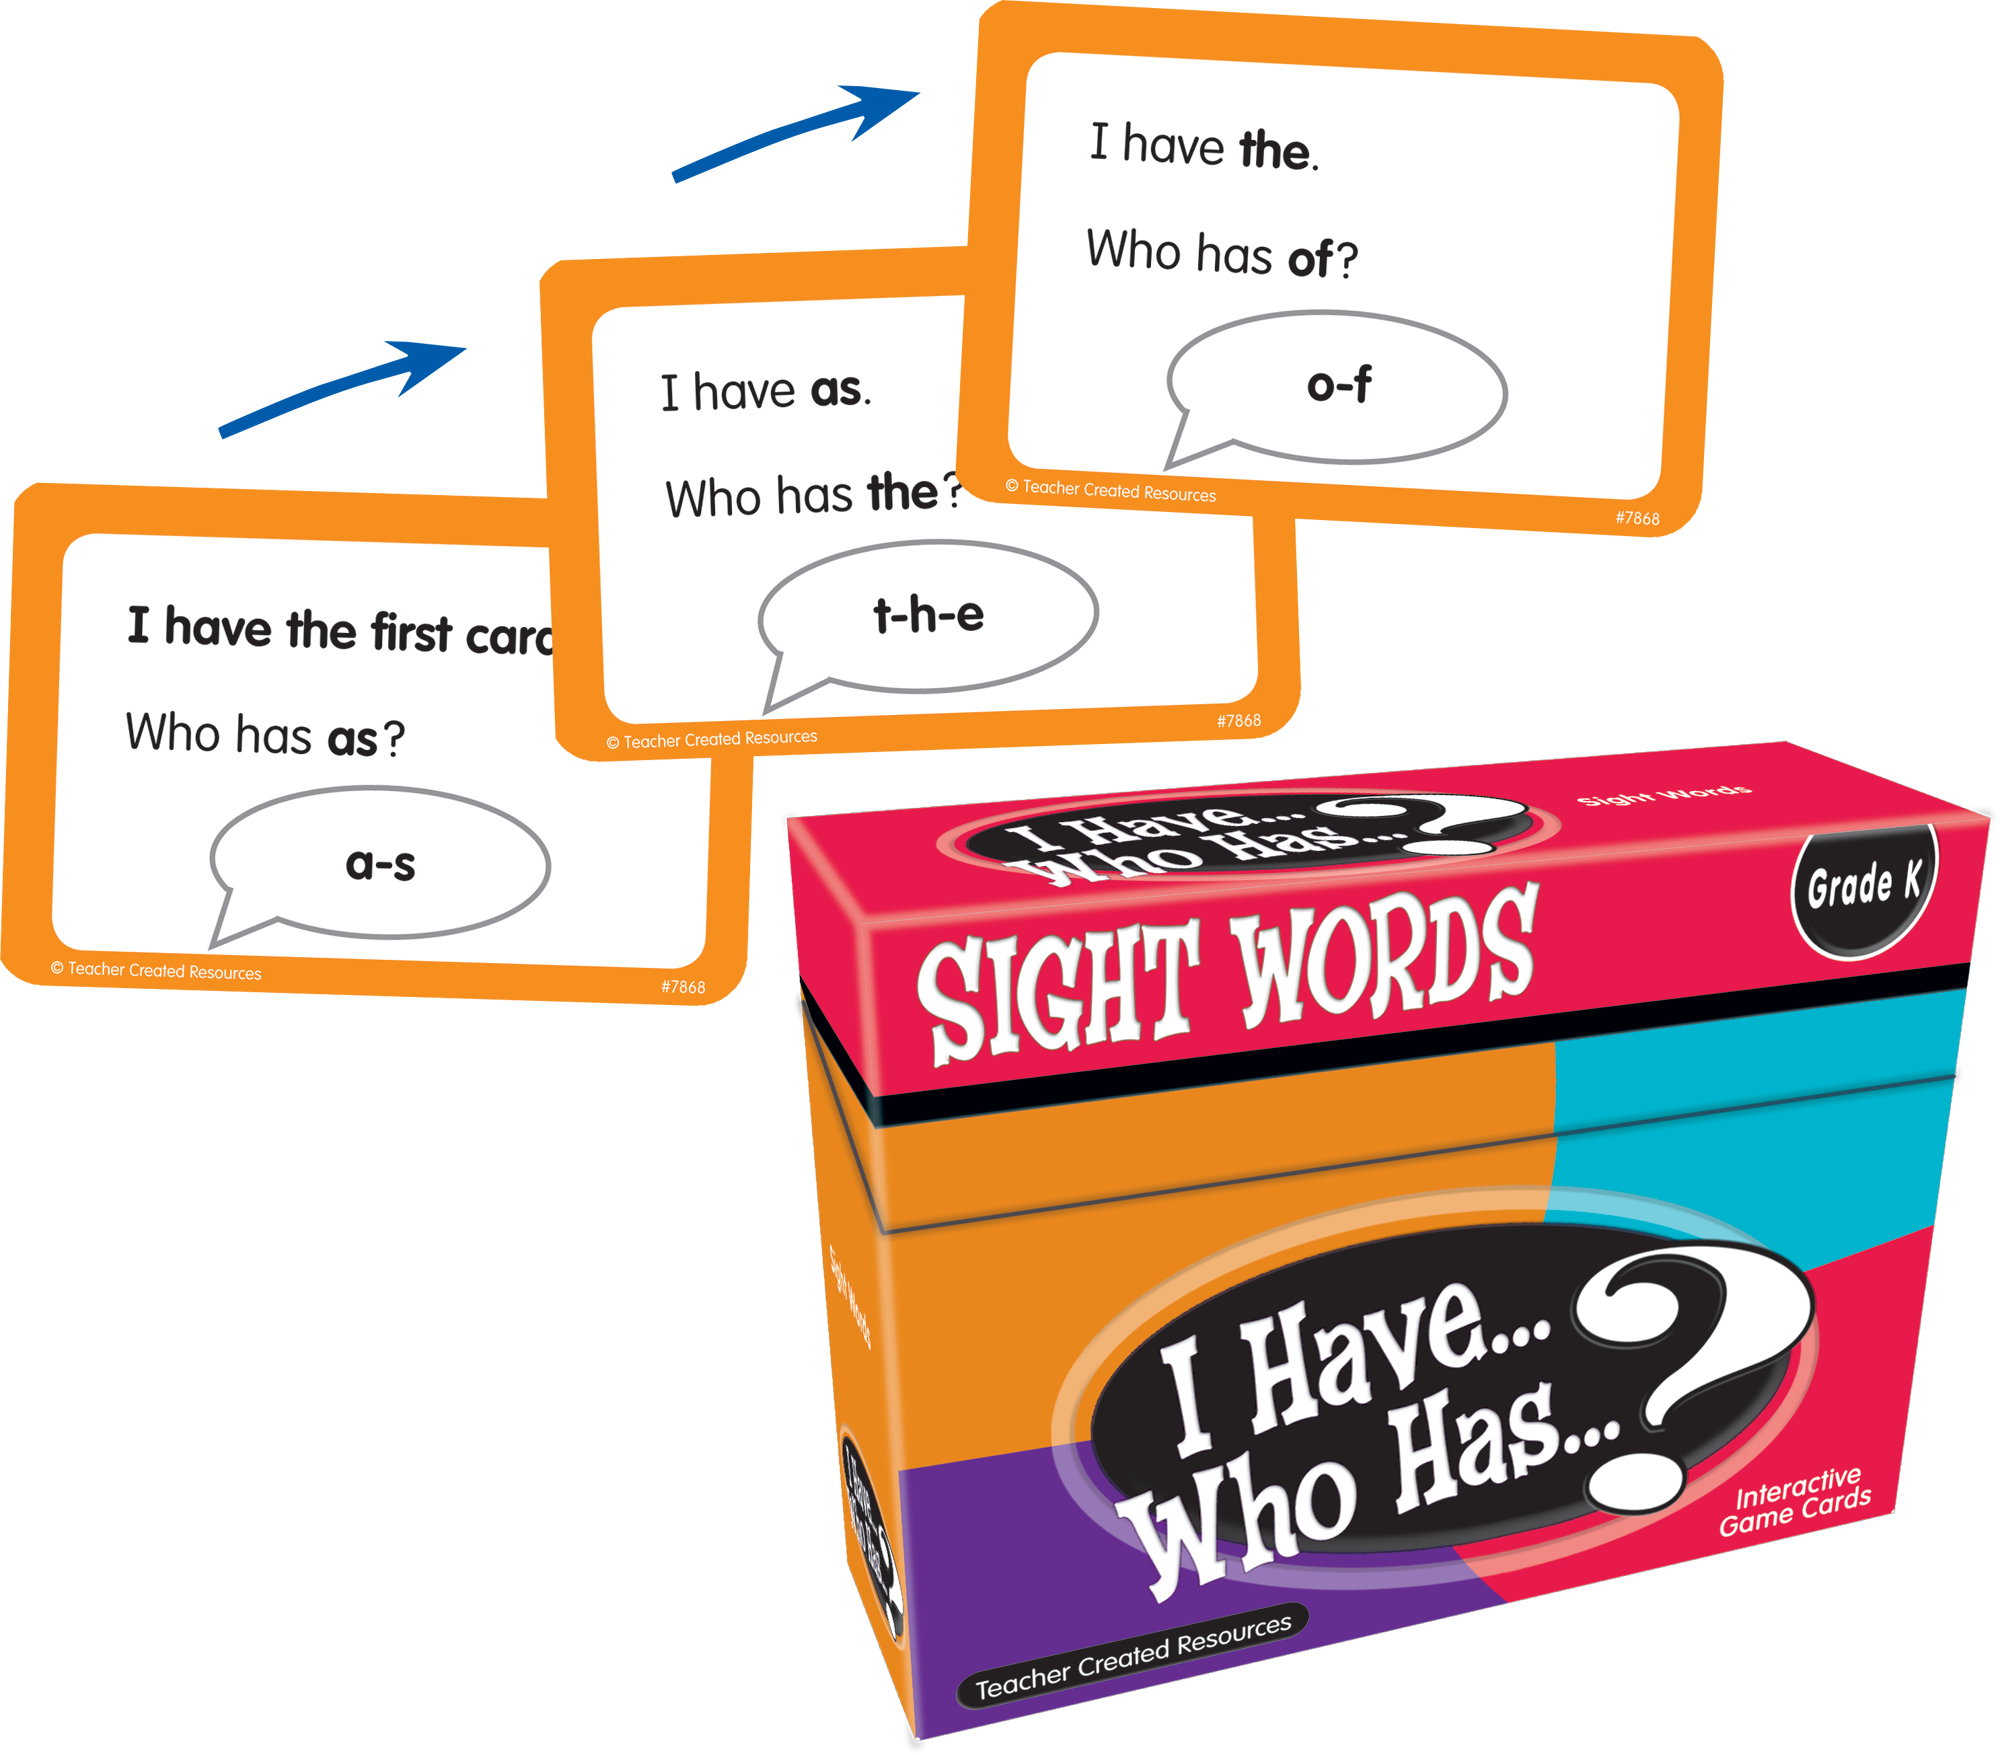 I Have... Who Has...? Sight Words Game (Gr. K)